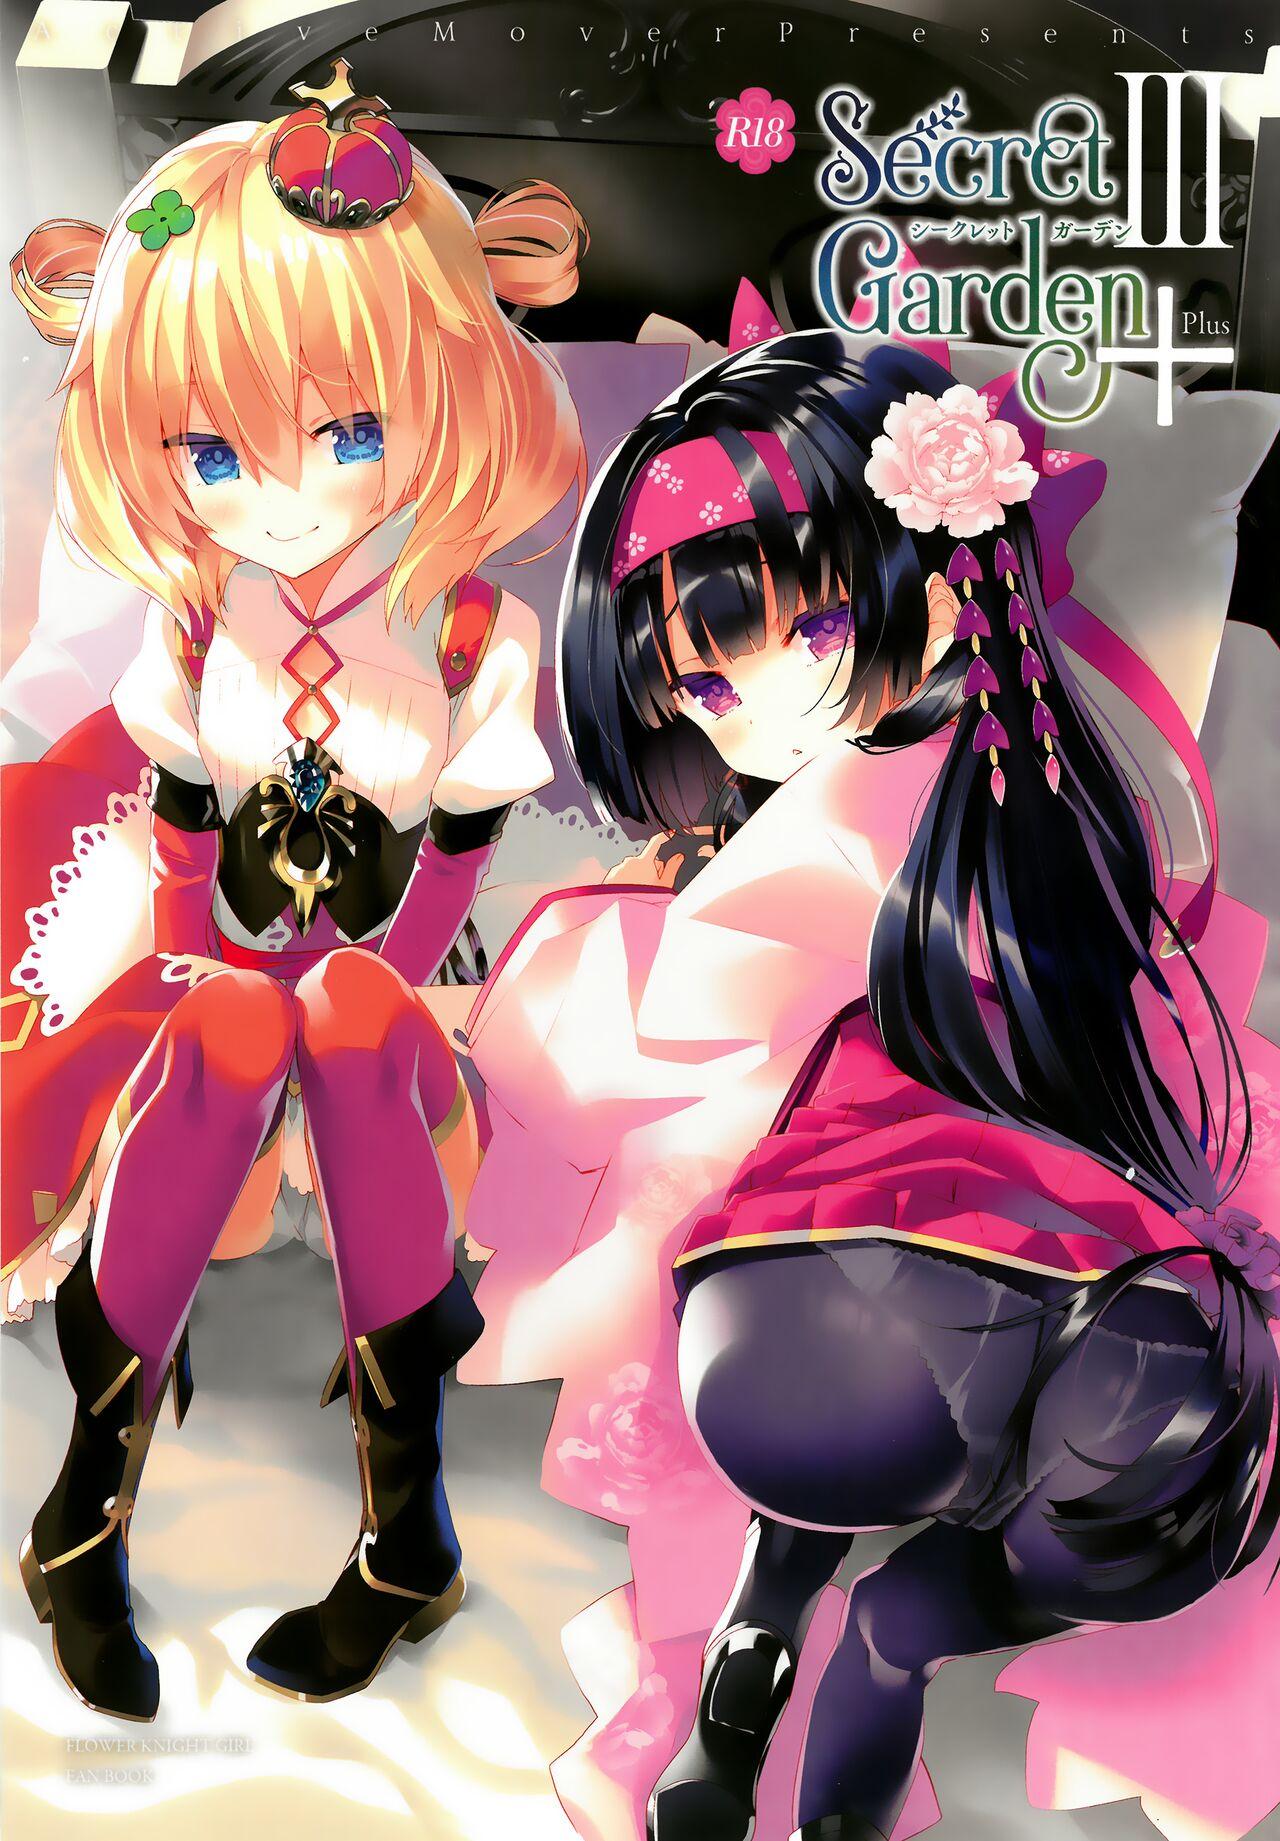 Softcore Secret Garden Plus III - Flower knight girl Whores - Picture 1